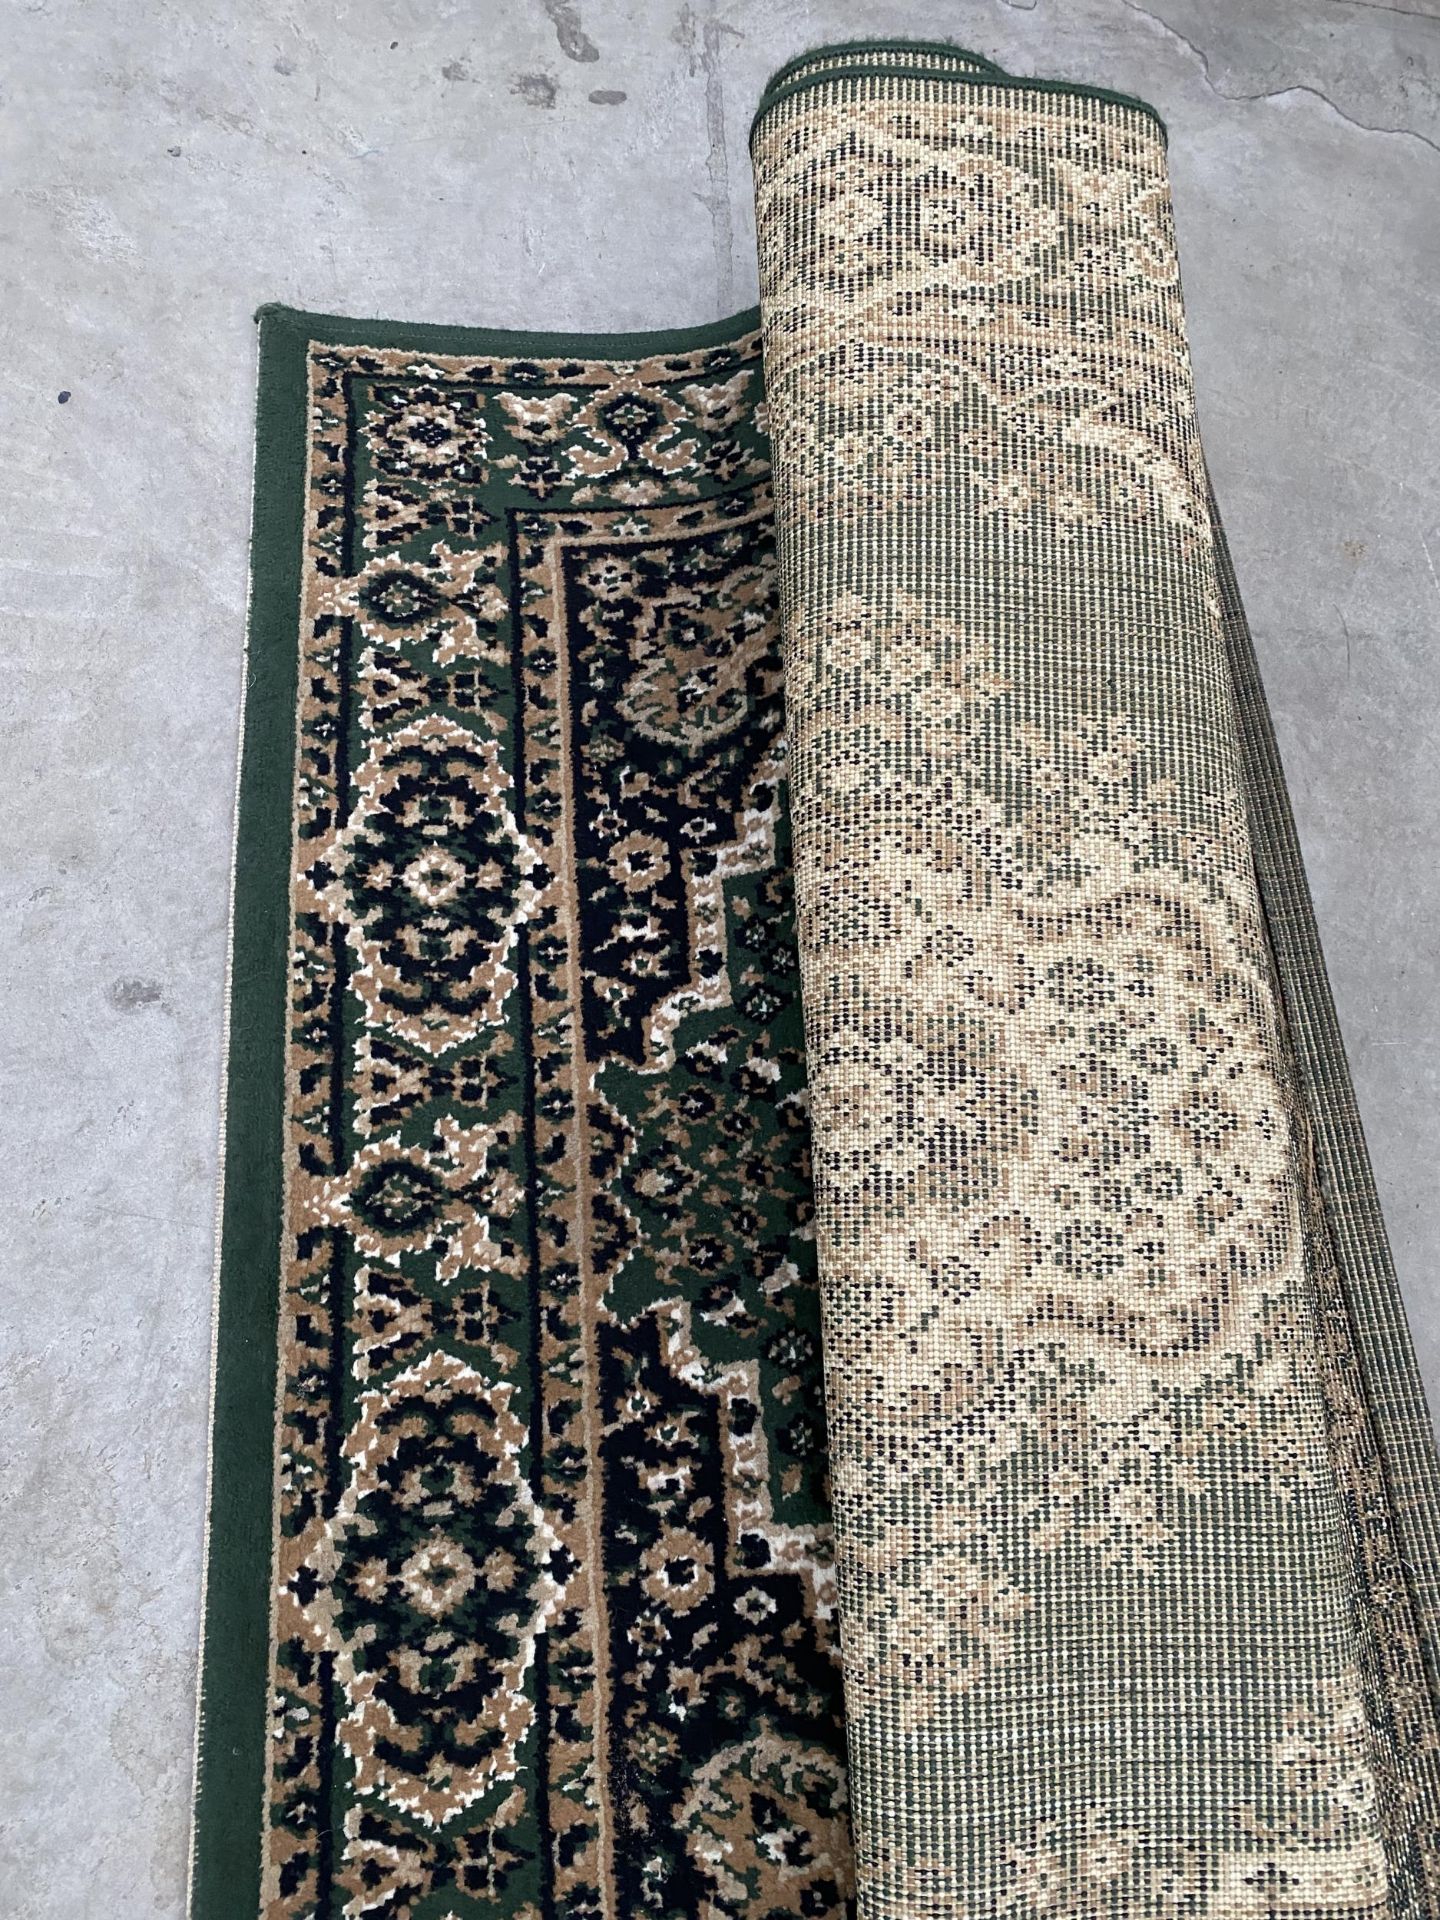 TWO SMALL GREEN PATTERNED RUGS - Image 2 of 3